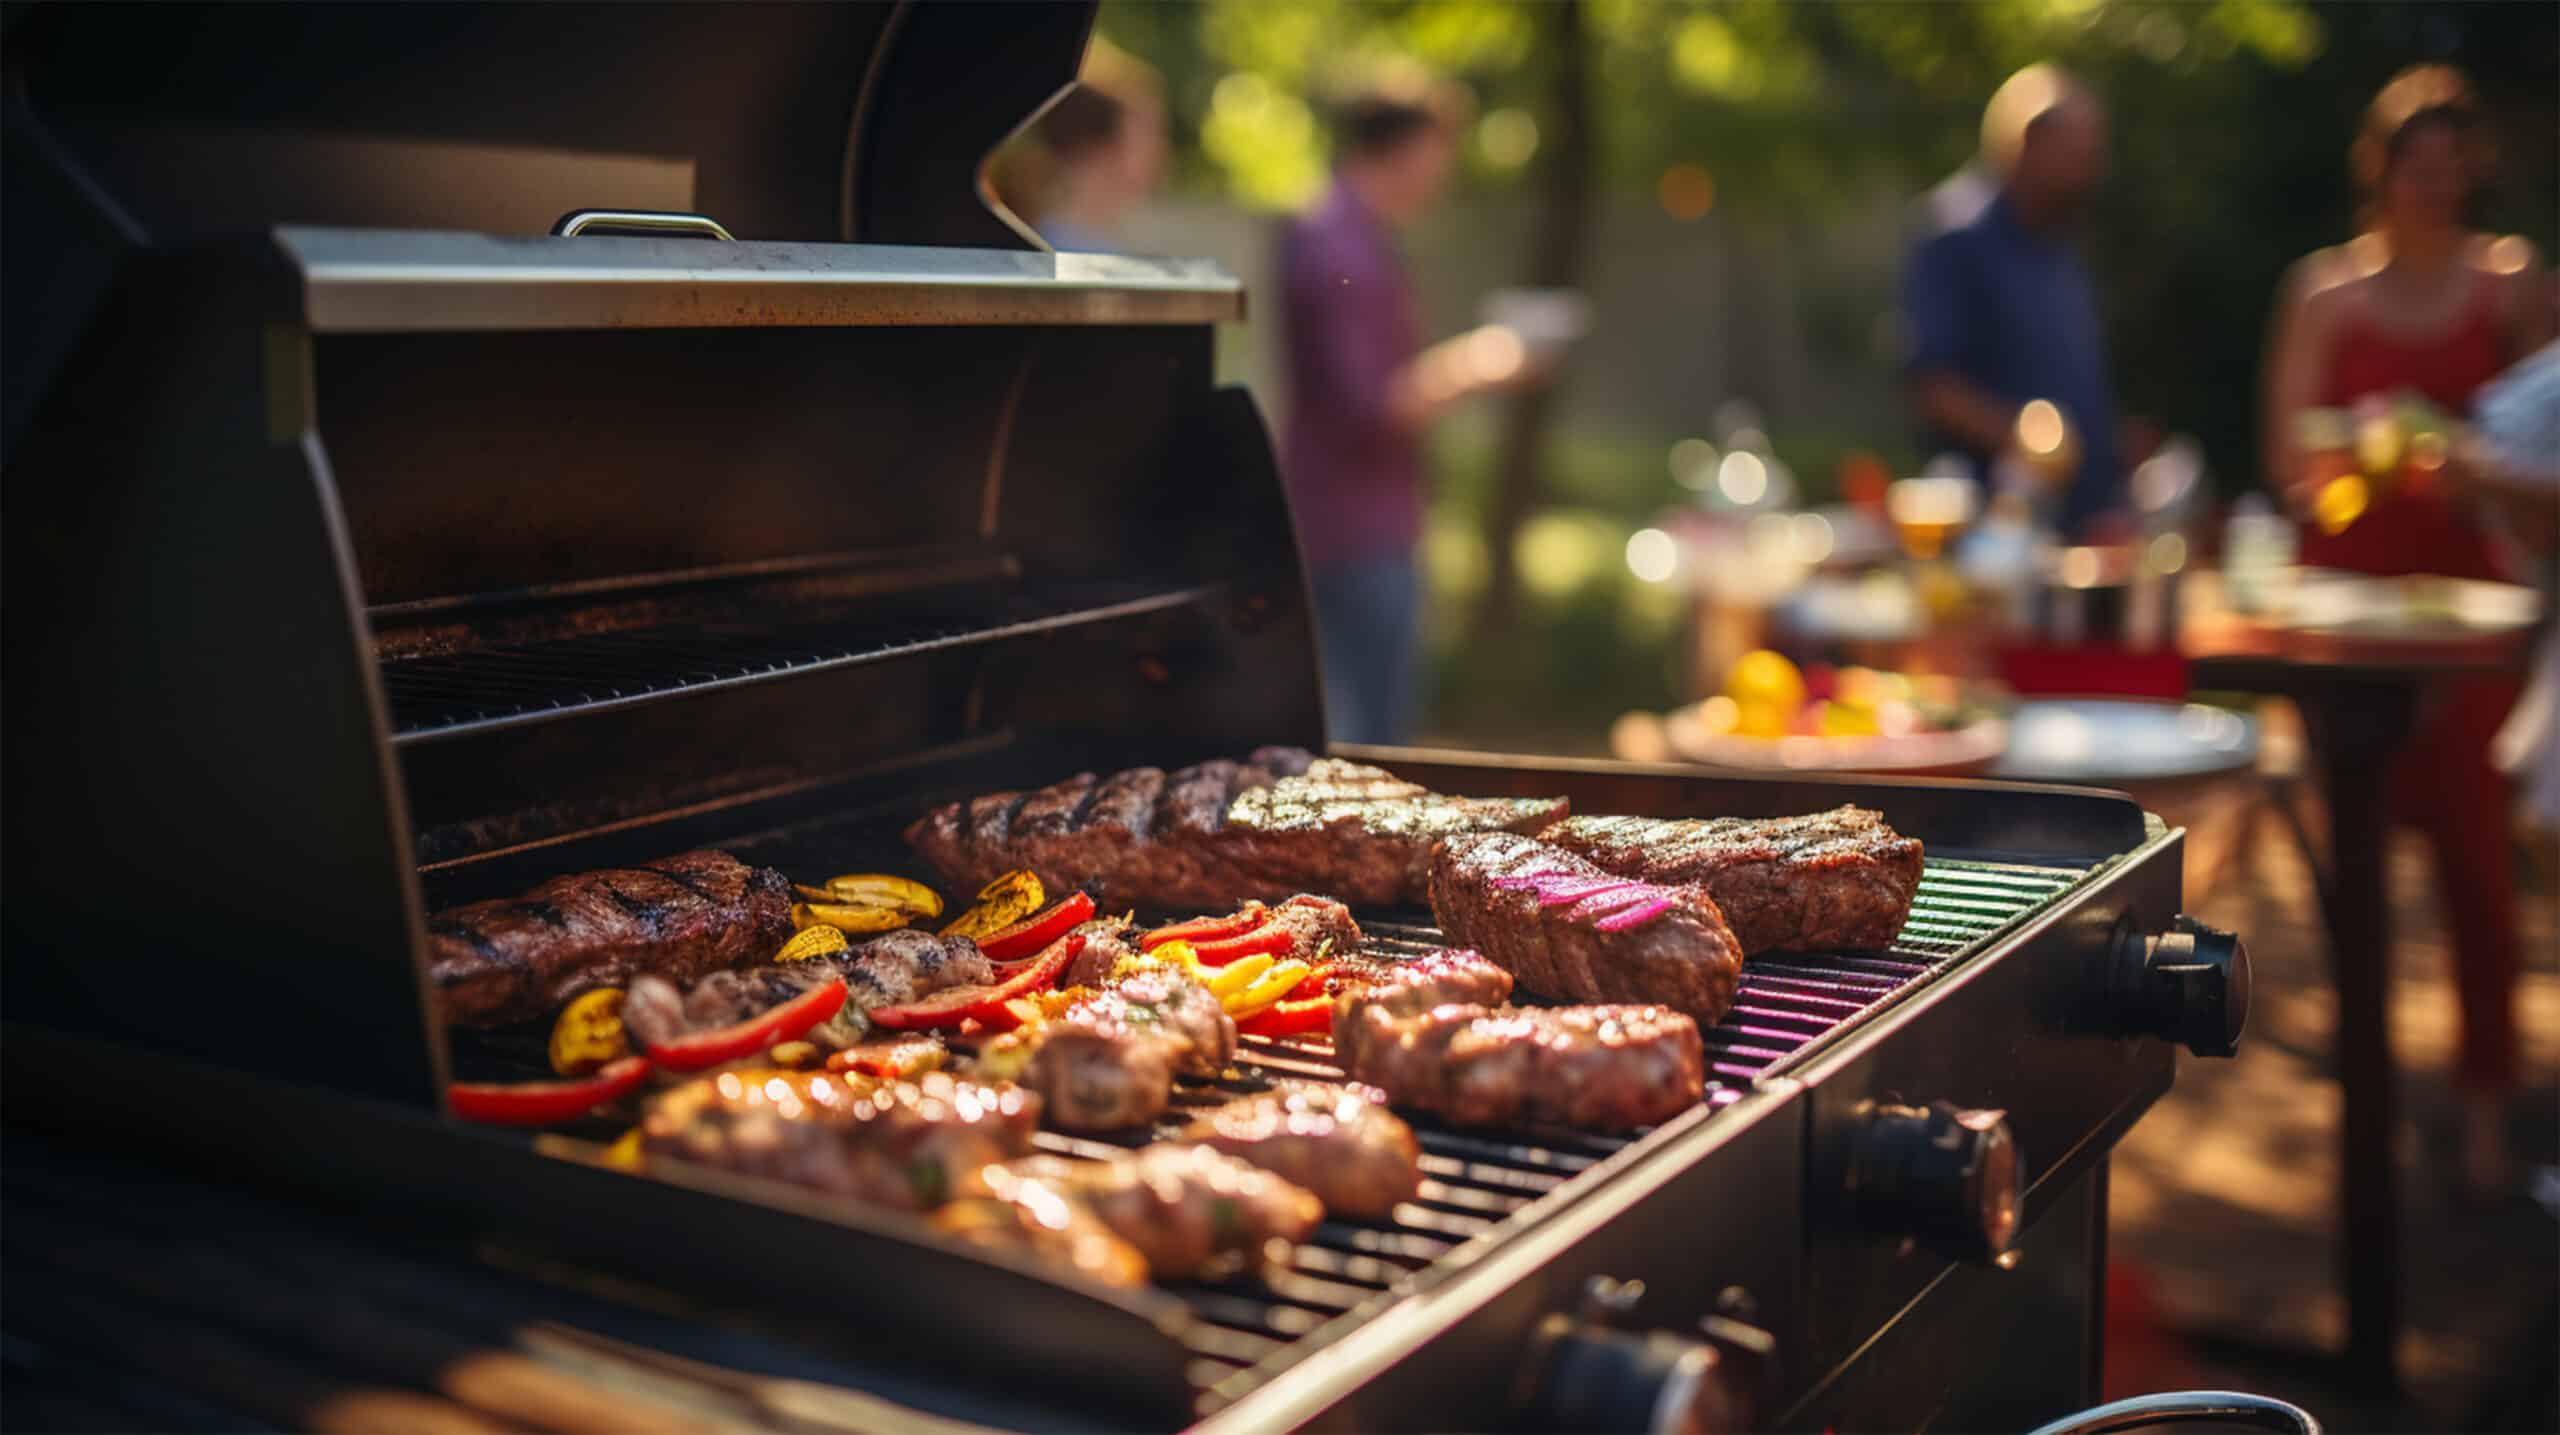 www.appr.com : How To Turn Gas Grill Into Smoker?